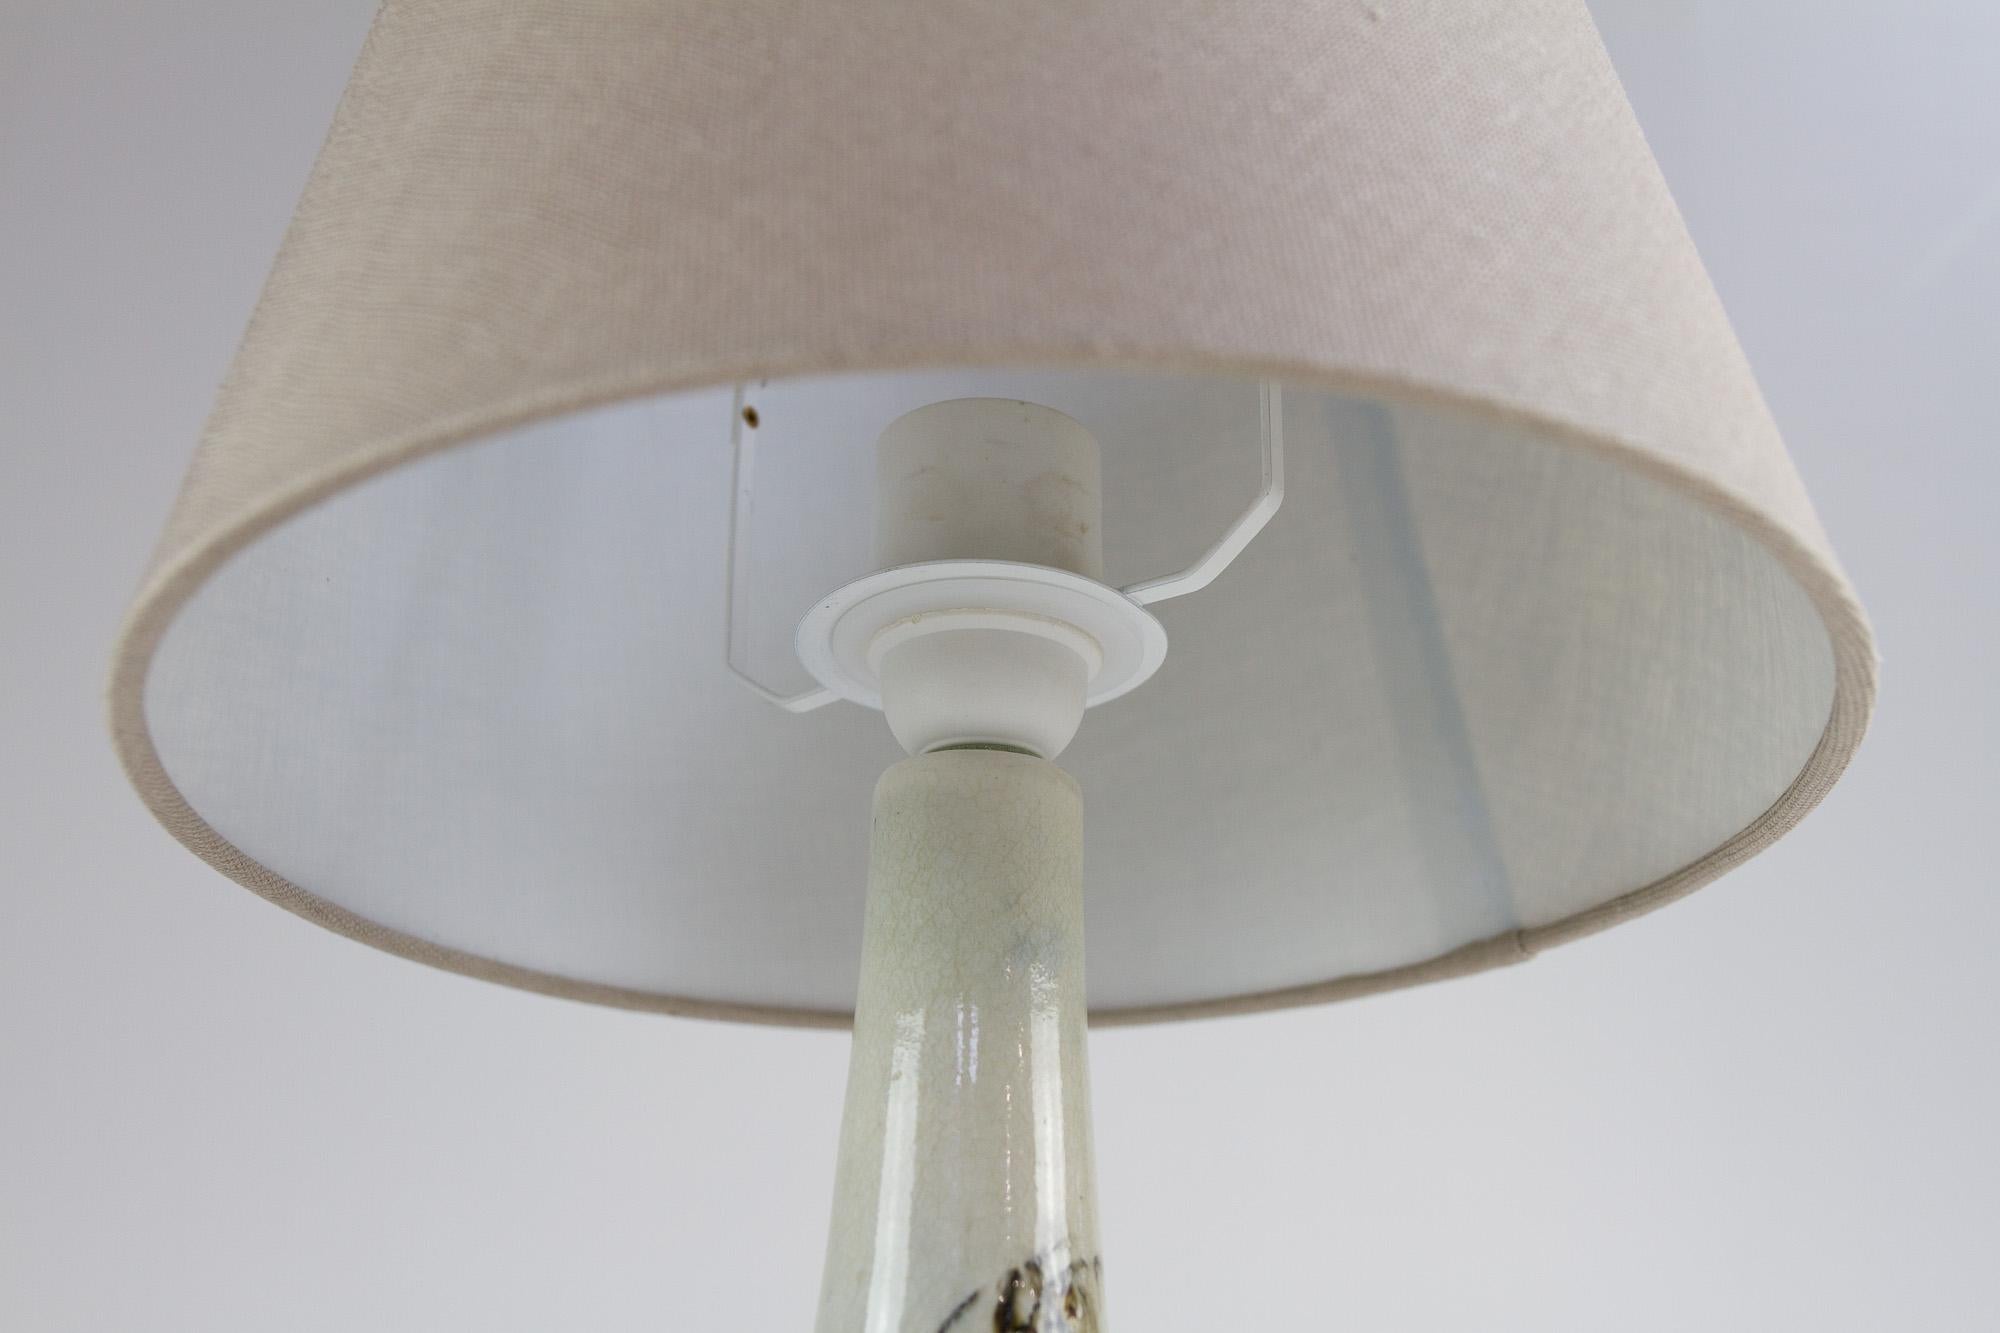 Vintage Danish Brutalist Ceramic Table Lamp by Conny Walther, 1960s For Sale 1